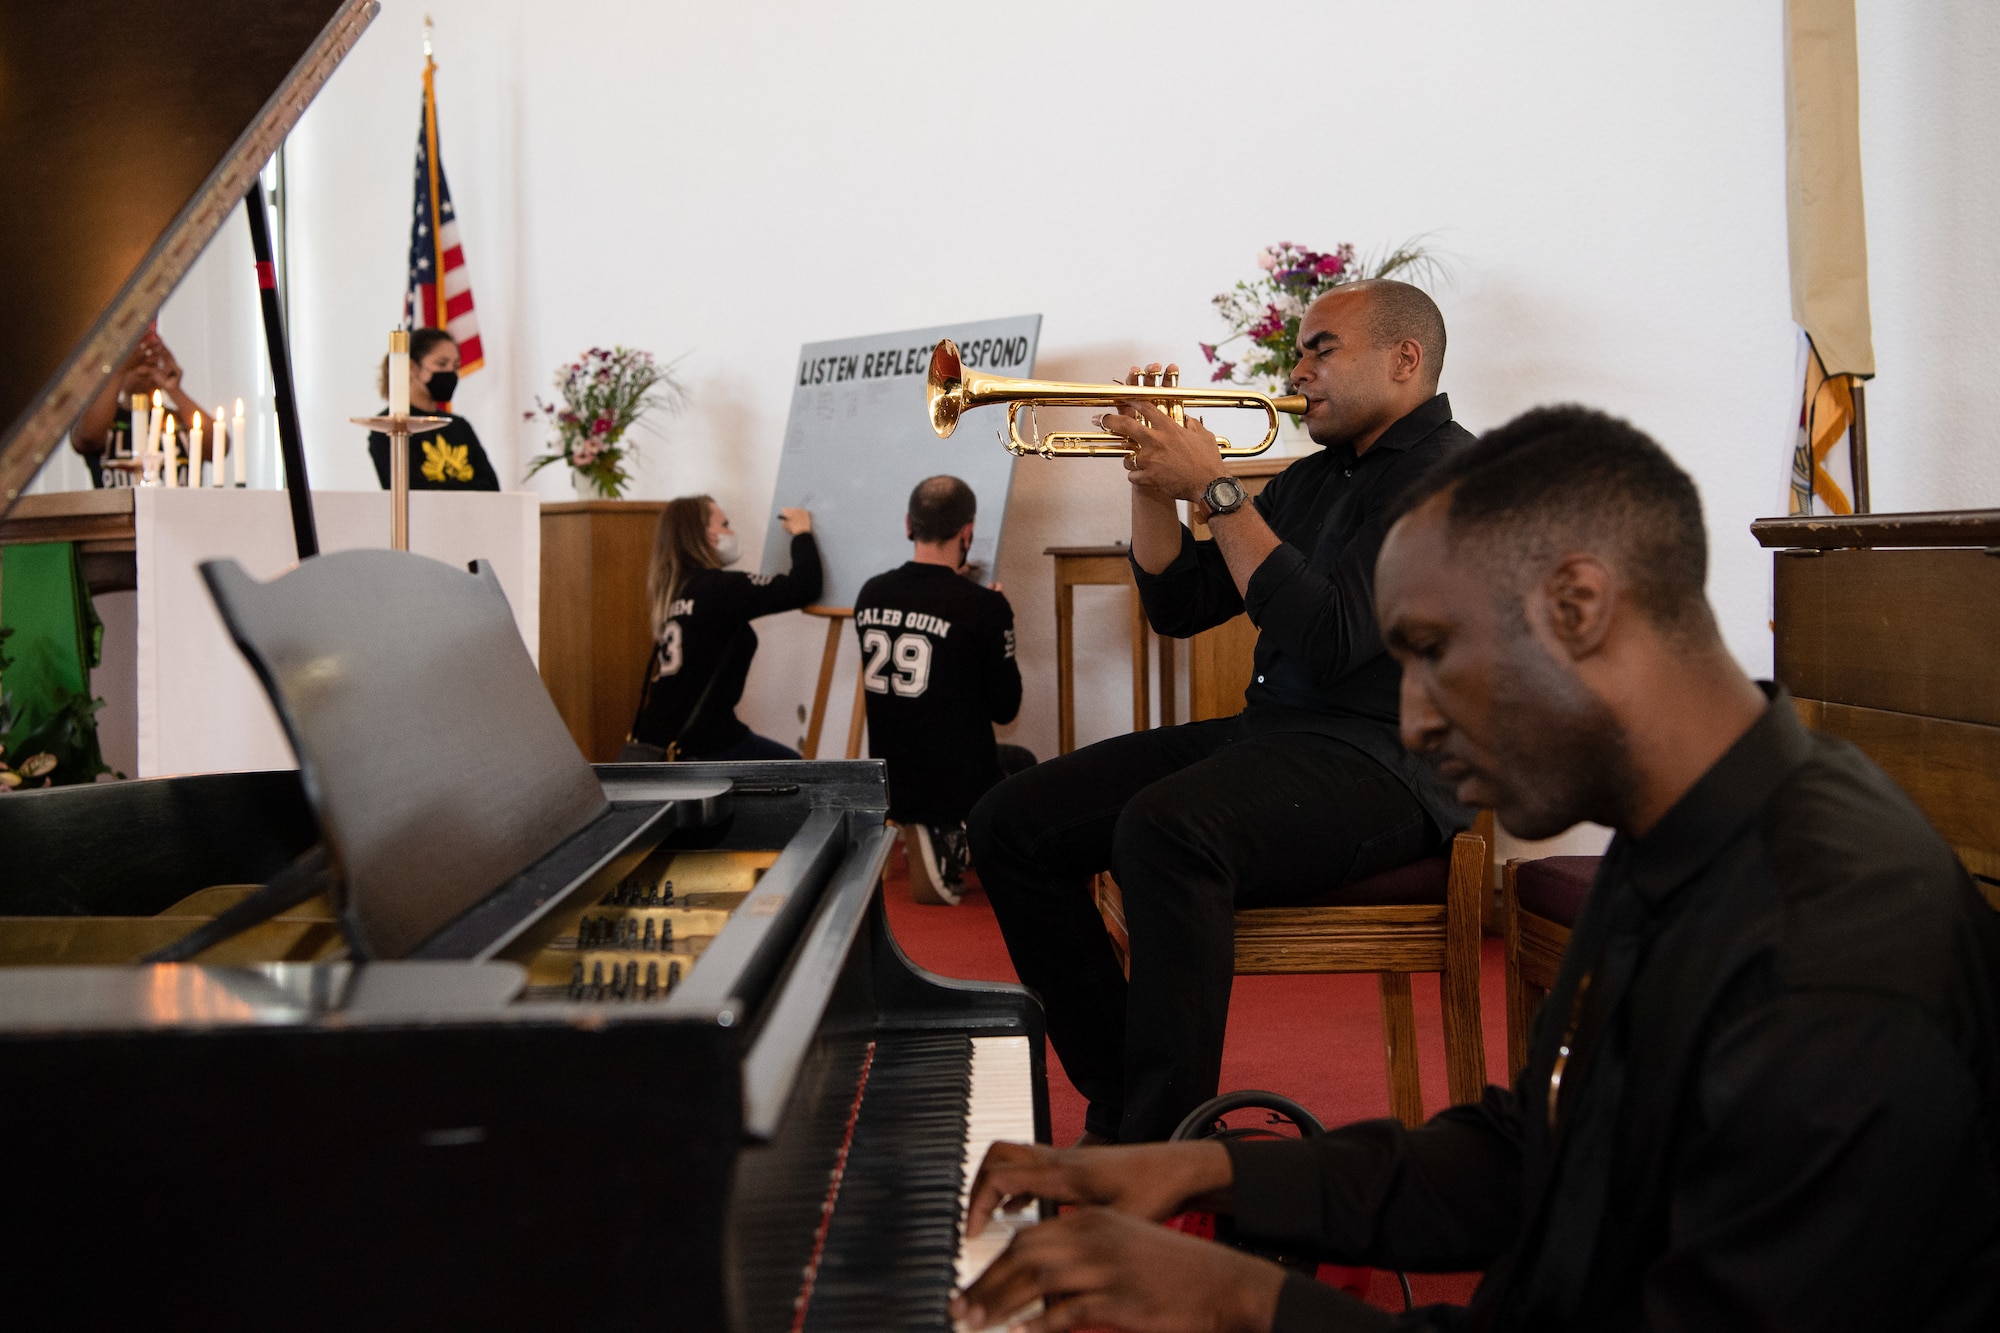 U.S. Army Sgt. 1st Class Christian William, U.S. Army Europe Band and Chorus platoon sergeant, and Spc. Willie Reed, USAREUR Band and Chorus pianist, play music during the Juneteenth: Vigil for Healing event at Ramstein Air Base, Germany, June 19, 2020.